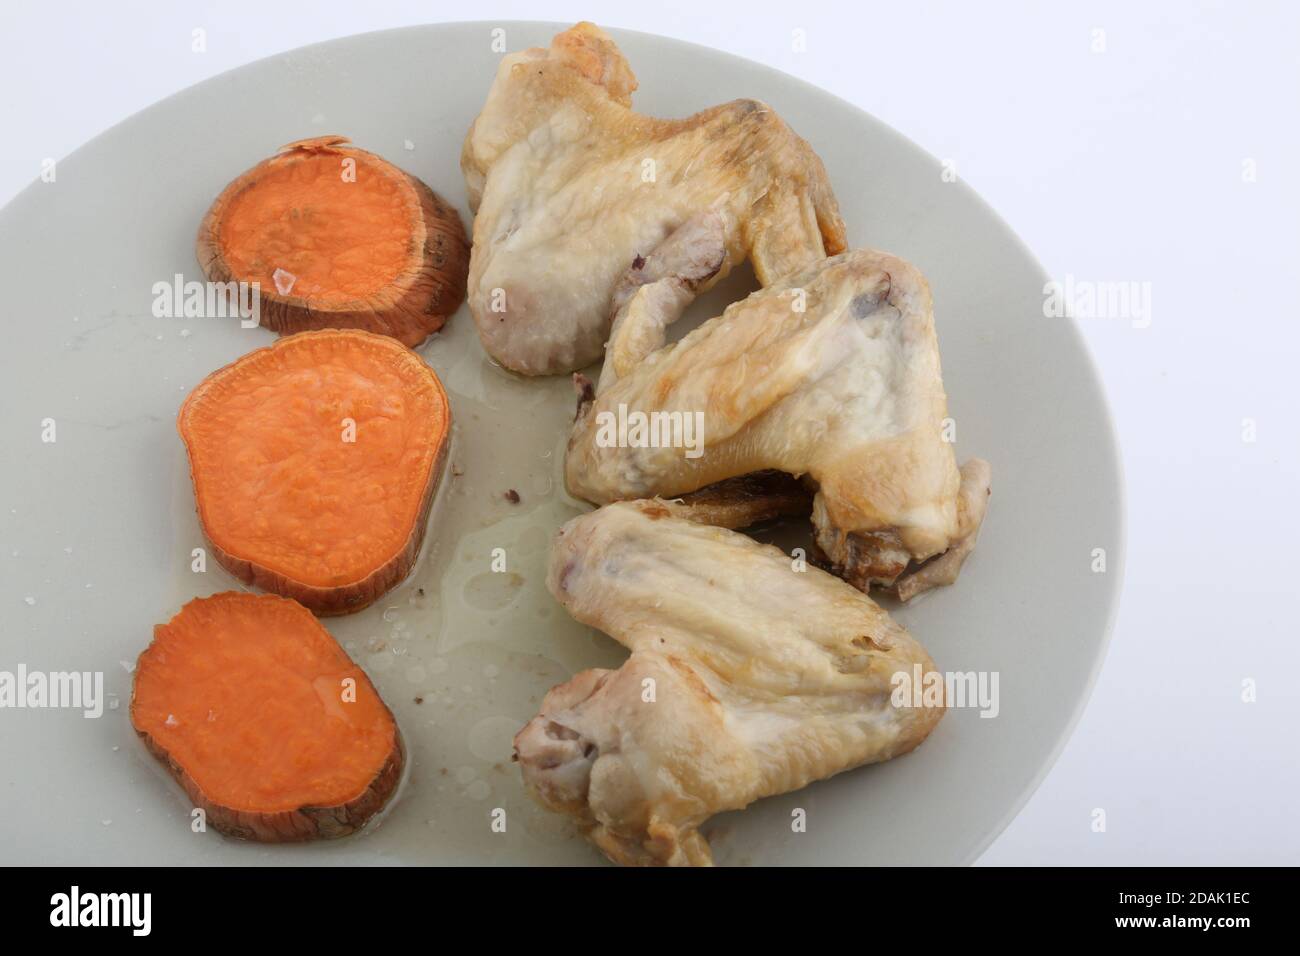 chicken wings with carrot side as ketogenic diet Stock Photo